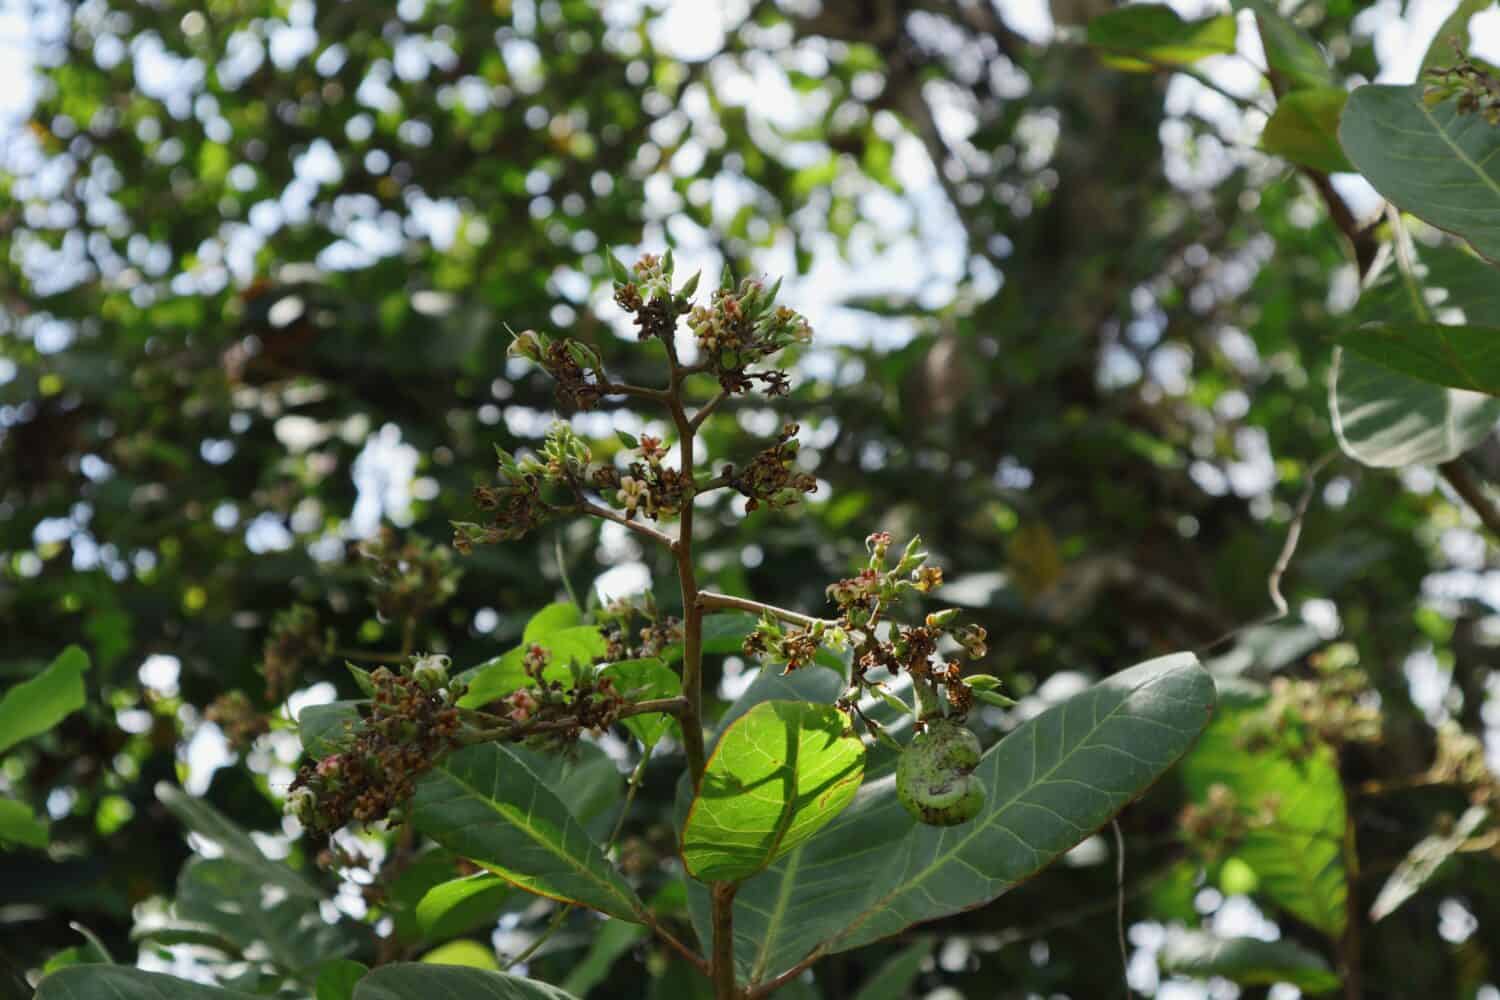 Branched inflorescence with a young cashew nut of a Cashew tree (Anacardium Occidentale) in the wild